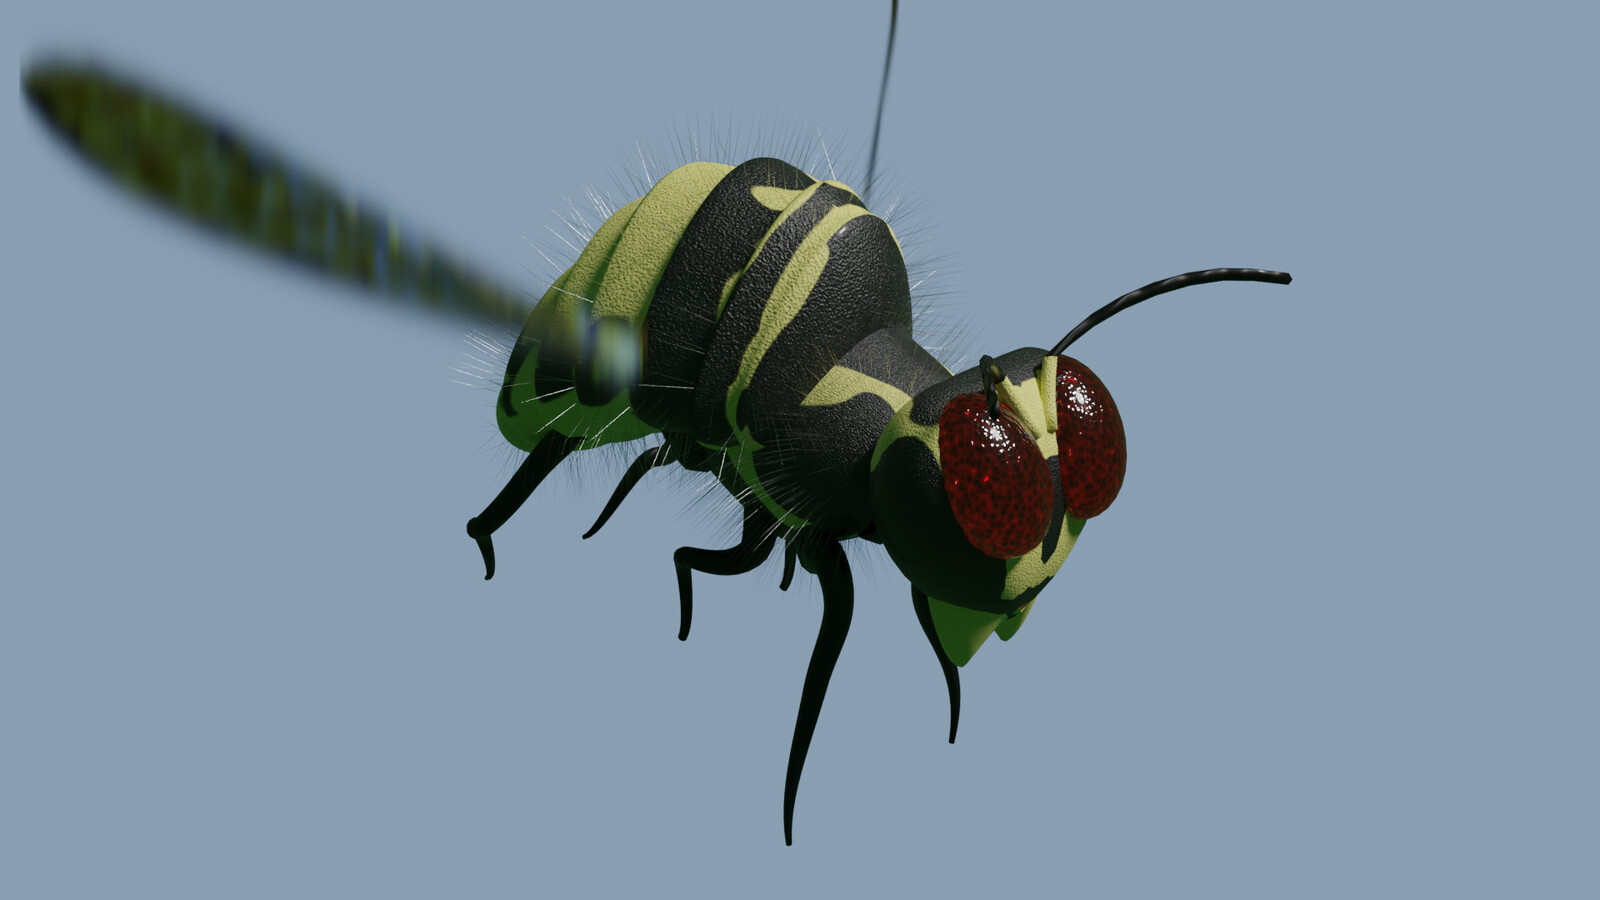 Realistic version of the same hornet